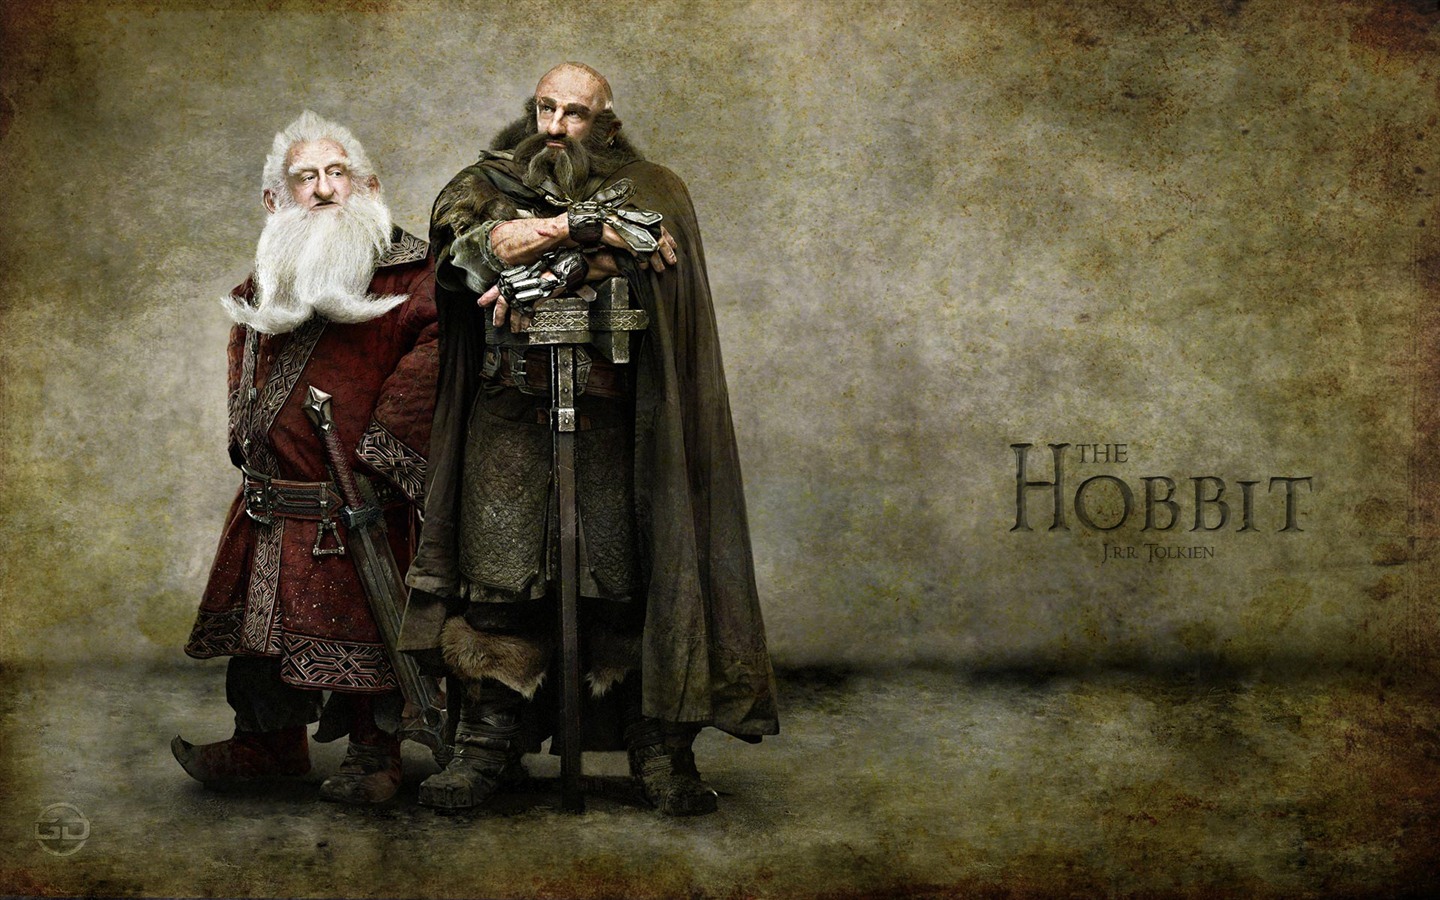 The Hobbit: An Unexpected Journey HD wallpapers #4 - 1440x900